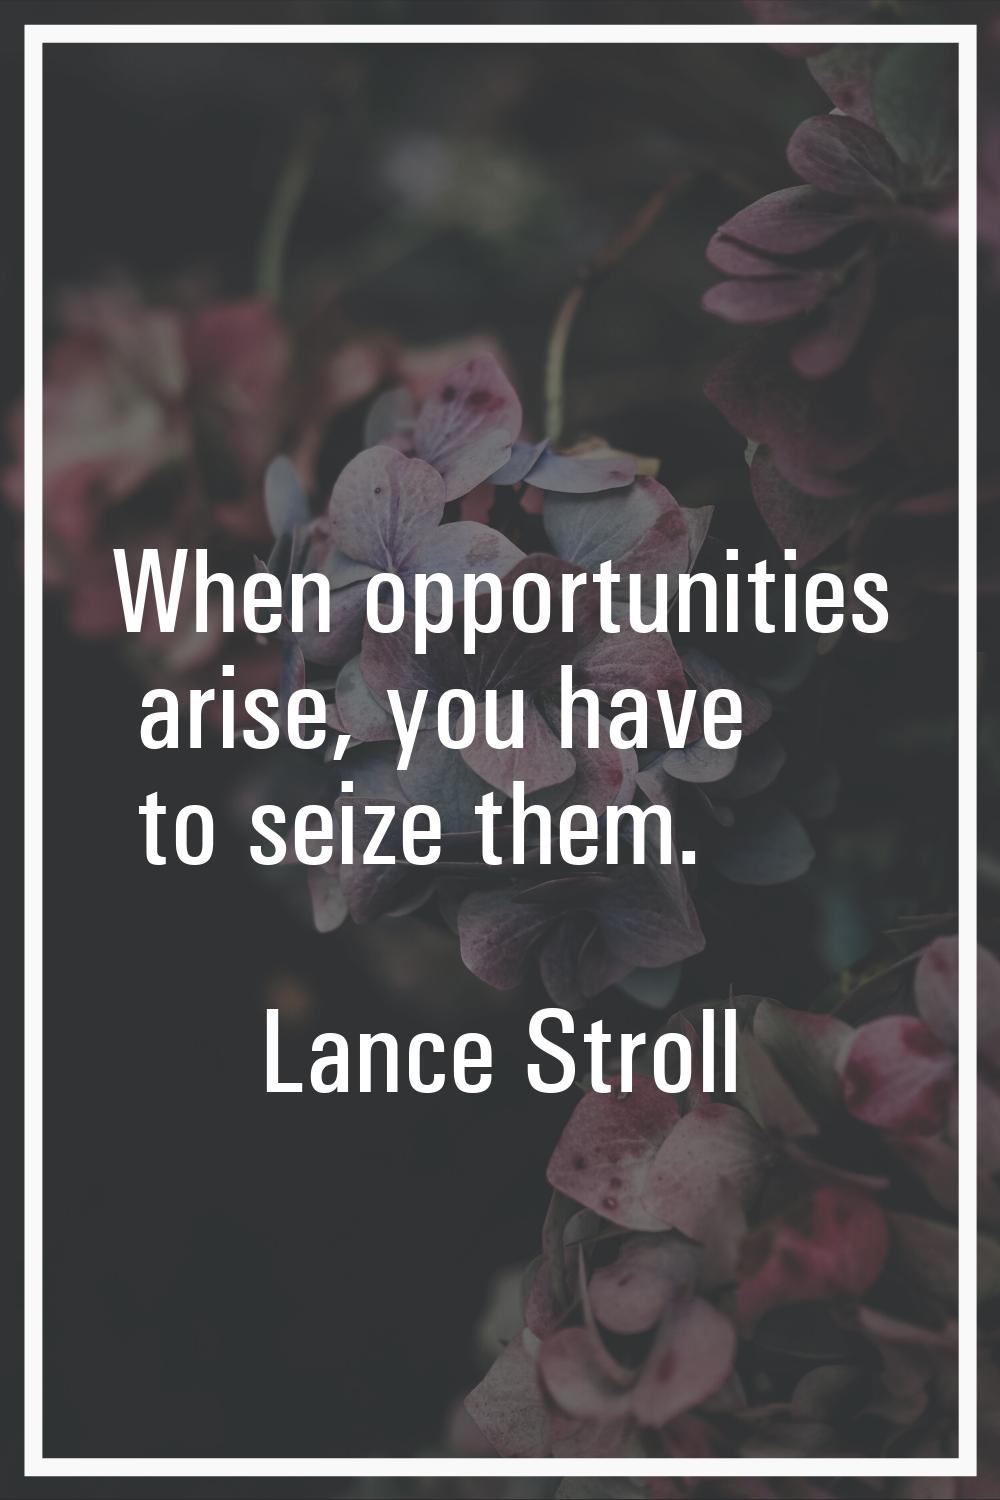 When opportunities arise, you have to seize them.